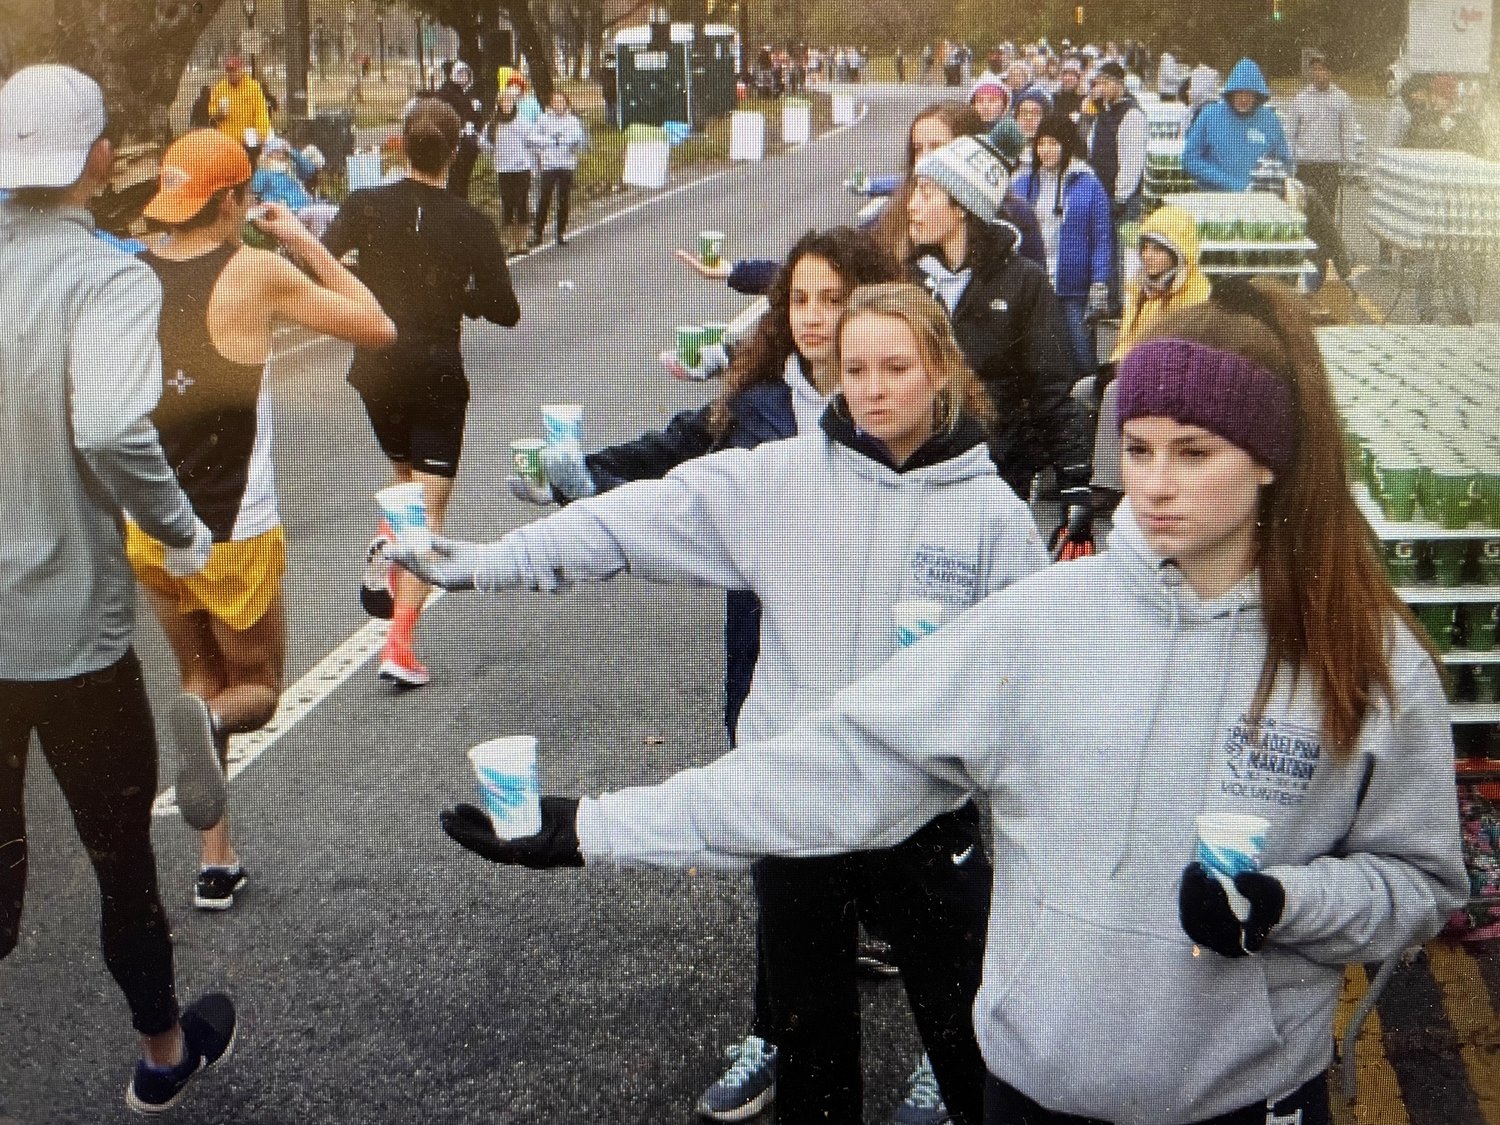 Volunteers from the Delaware County Road Runners Club hand out water at the Philadelphia Marathon.